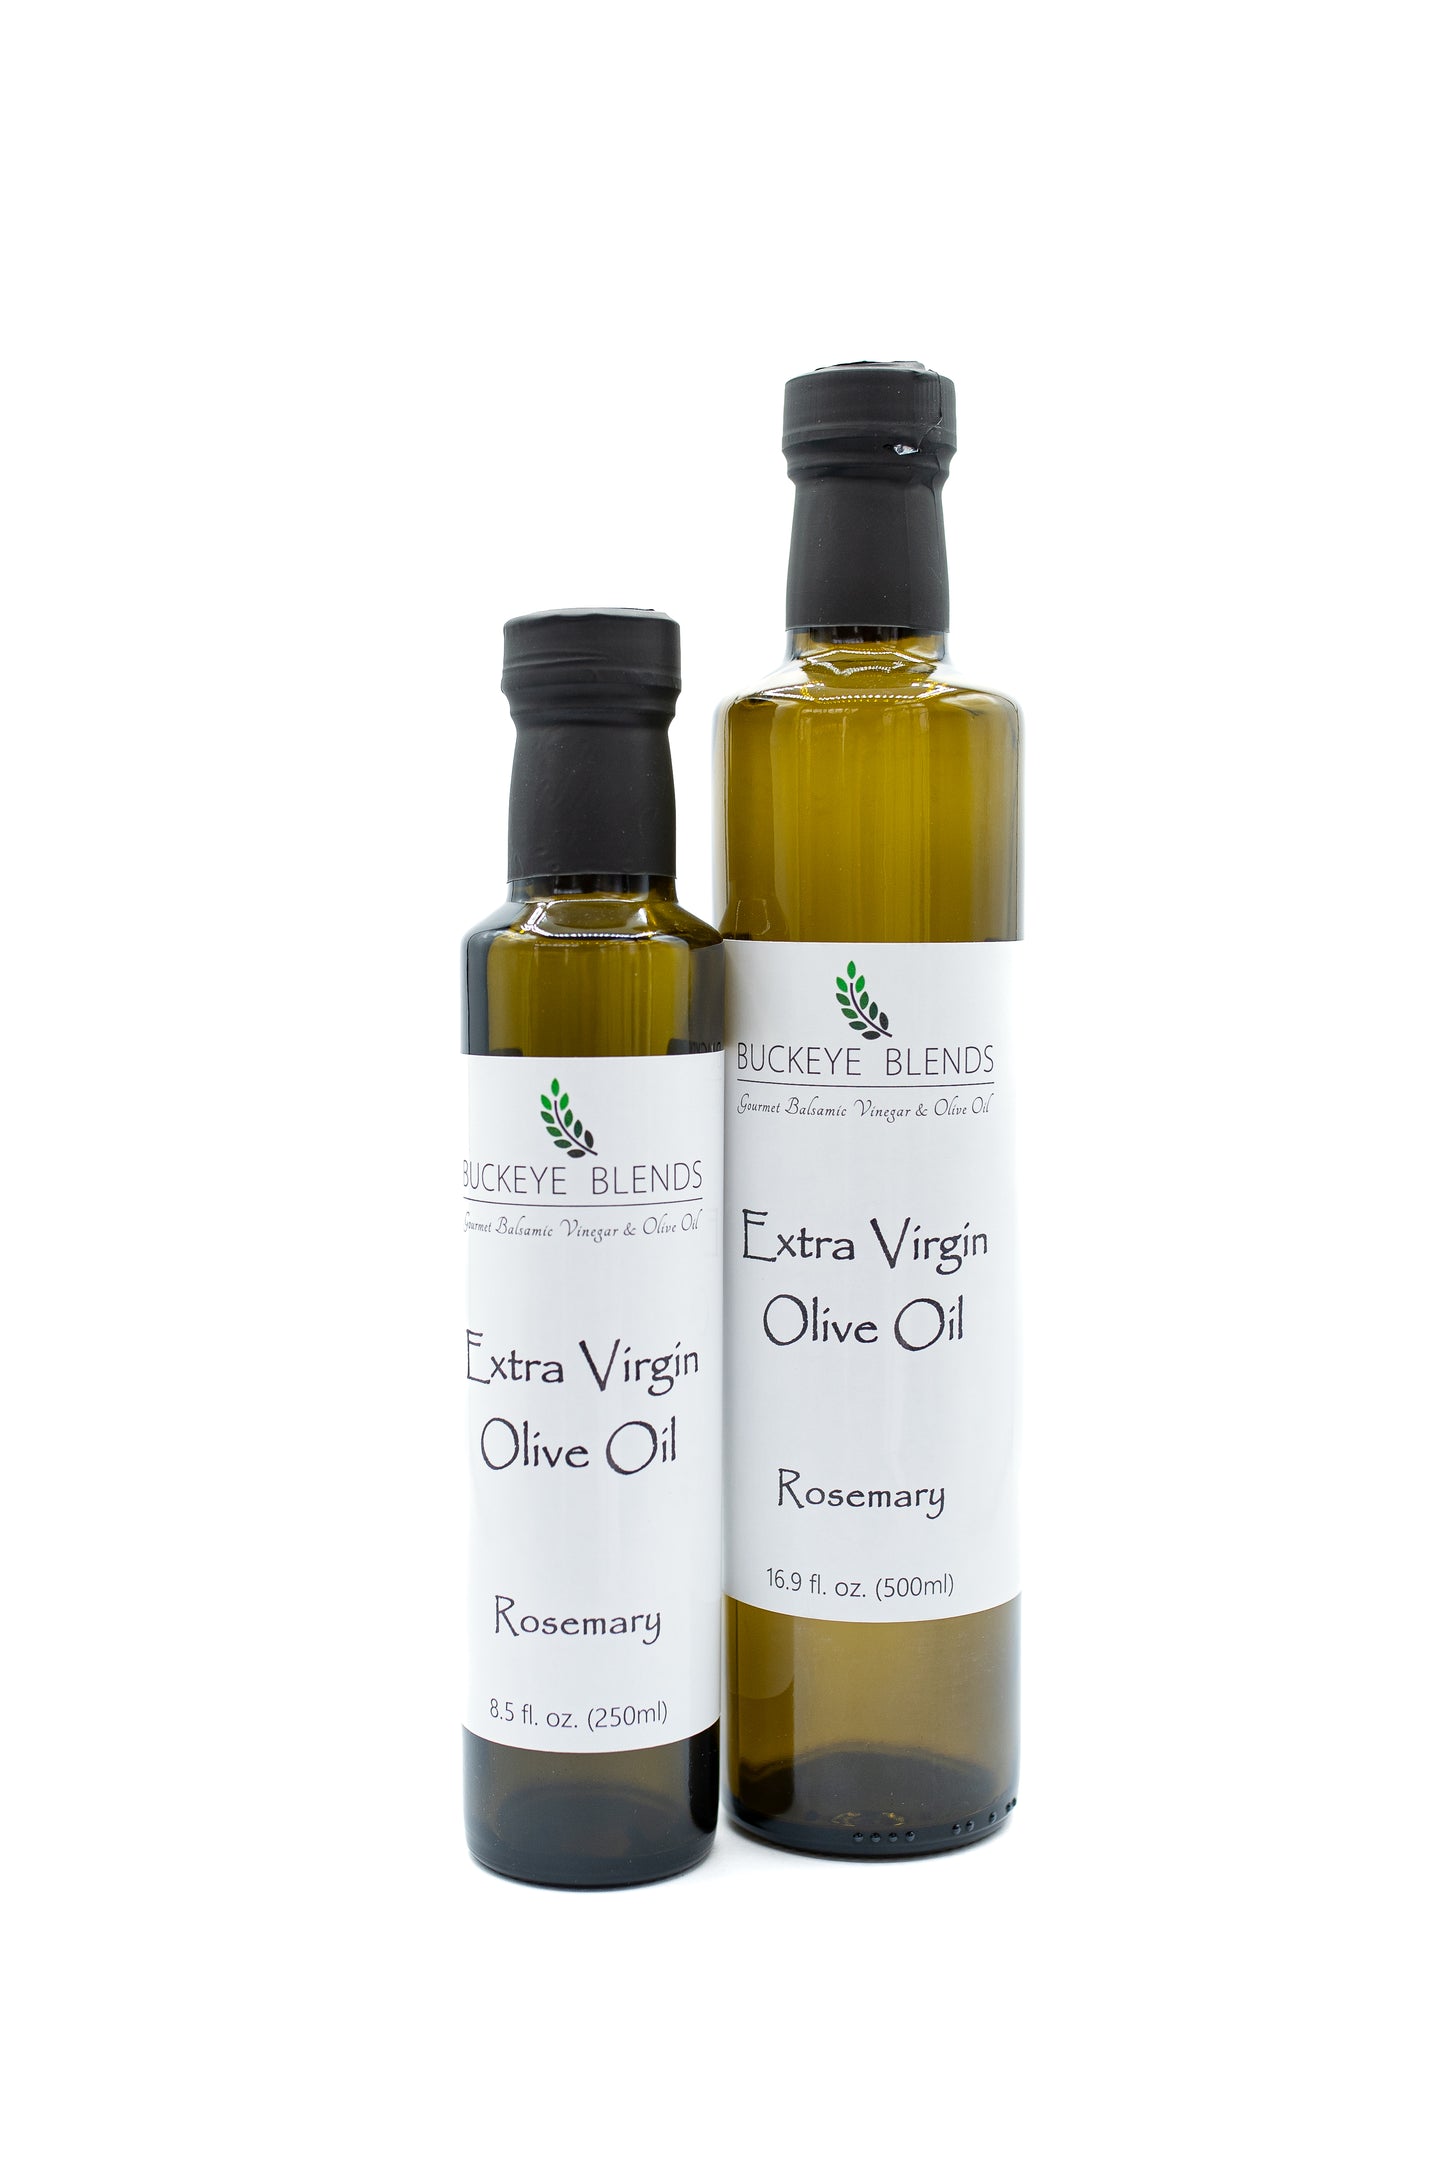 Buckeye Blends Rosemary Extra Virgin Olive Oil is a delicious rosemary oil perfect for dressing chicken, fish, pork, and salad!  One of the many pantry staples in our product line, our rosemary oil is extra virgin olive oil infused with all-natural rosemary flavor.